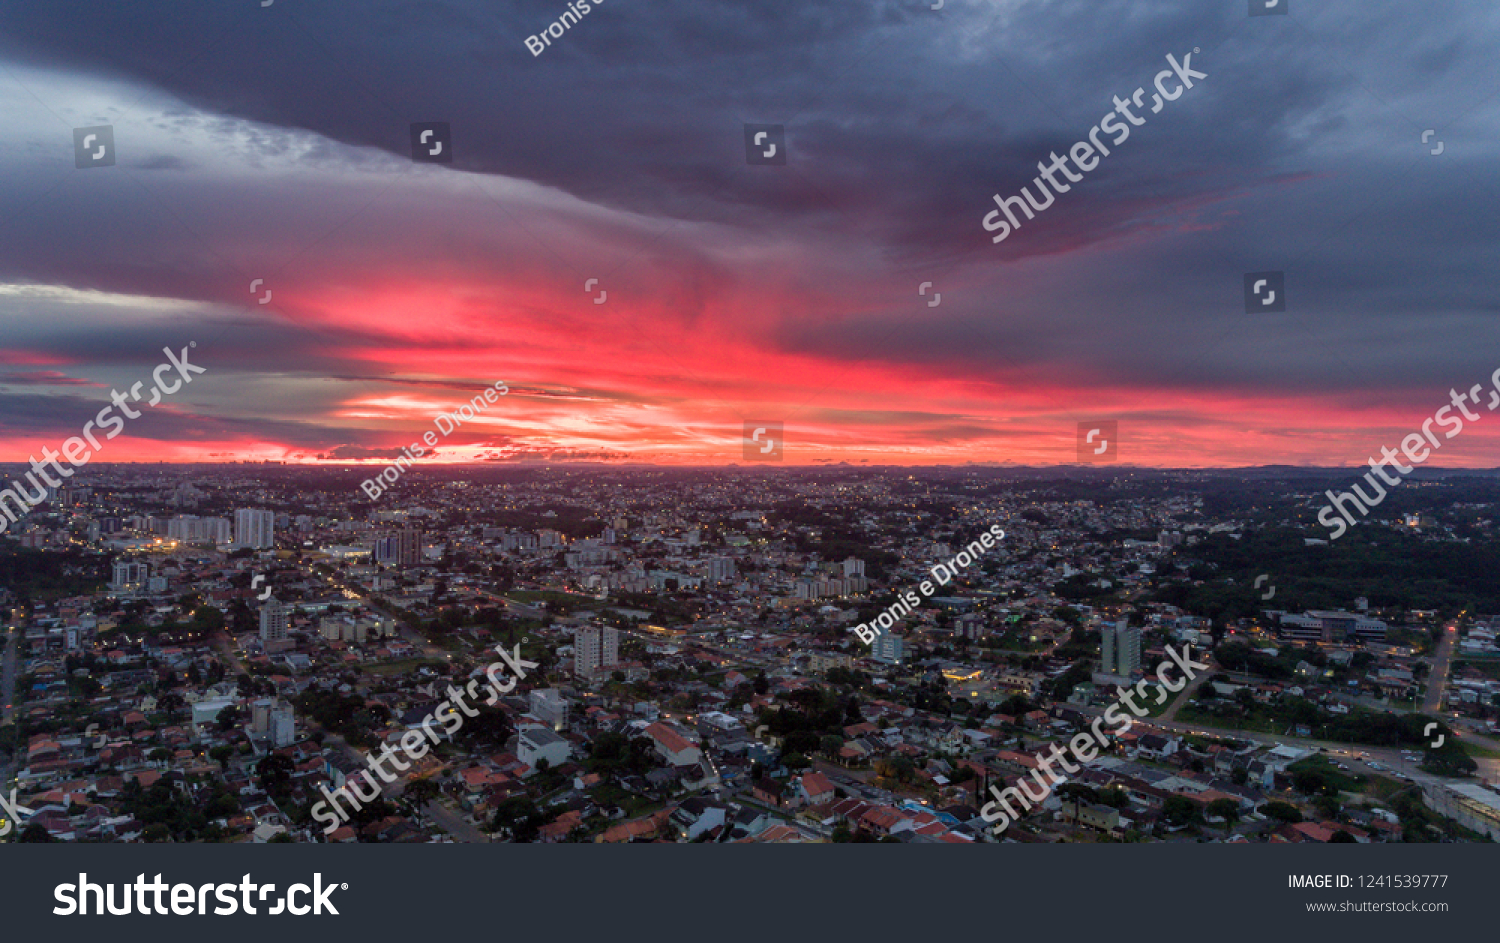 Sunset in Brazil in a gorgeous sunset after a heavy rain with red sky in blood color, image made by drone at 250 meters high.
 #1241539777